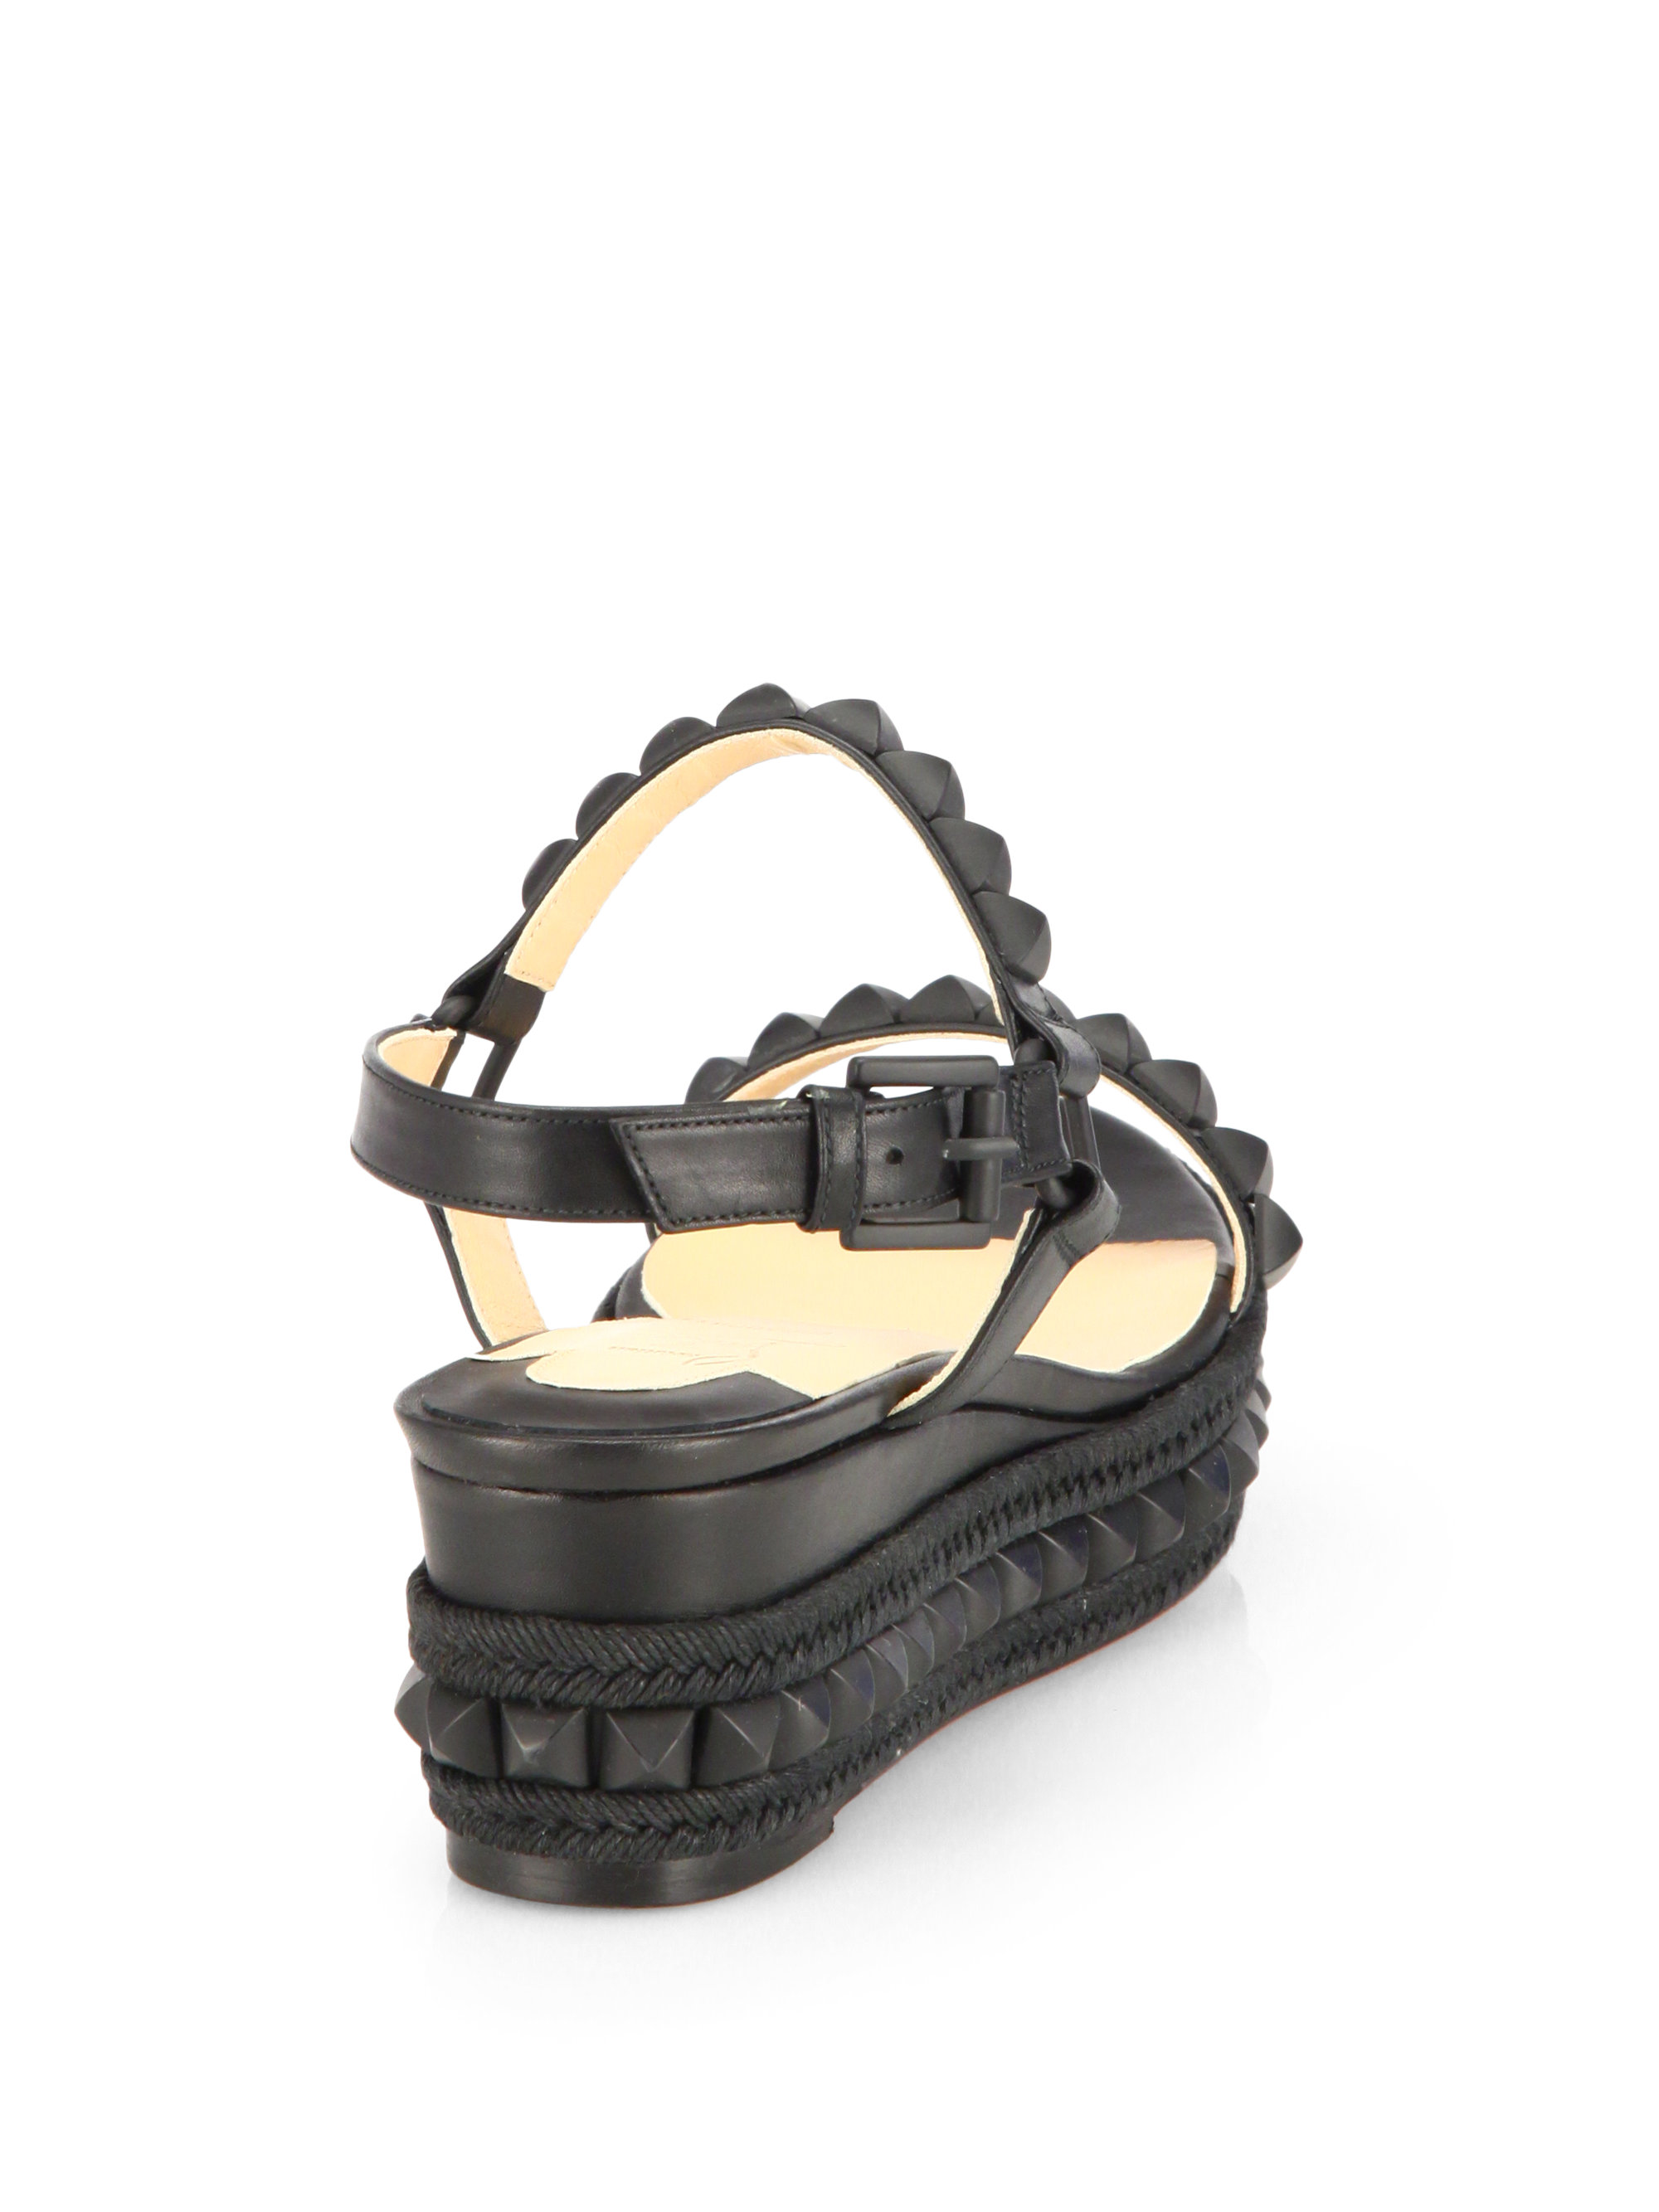 Christian louboutin Cataclou Studded Wedge Sandals in Black | Lyst  